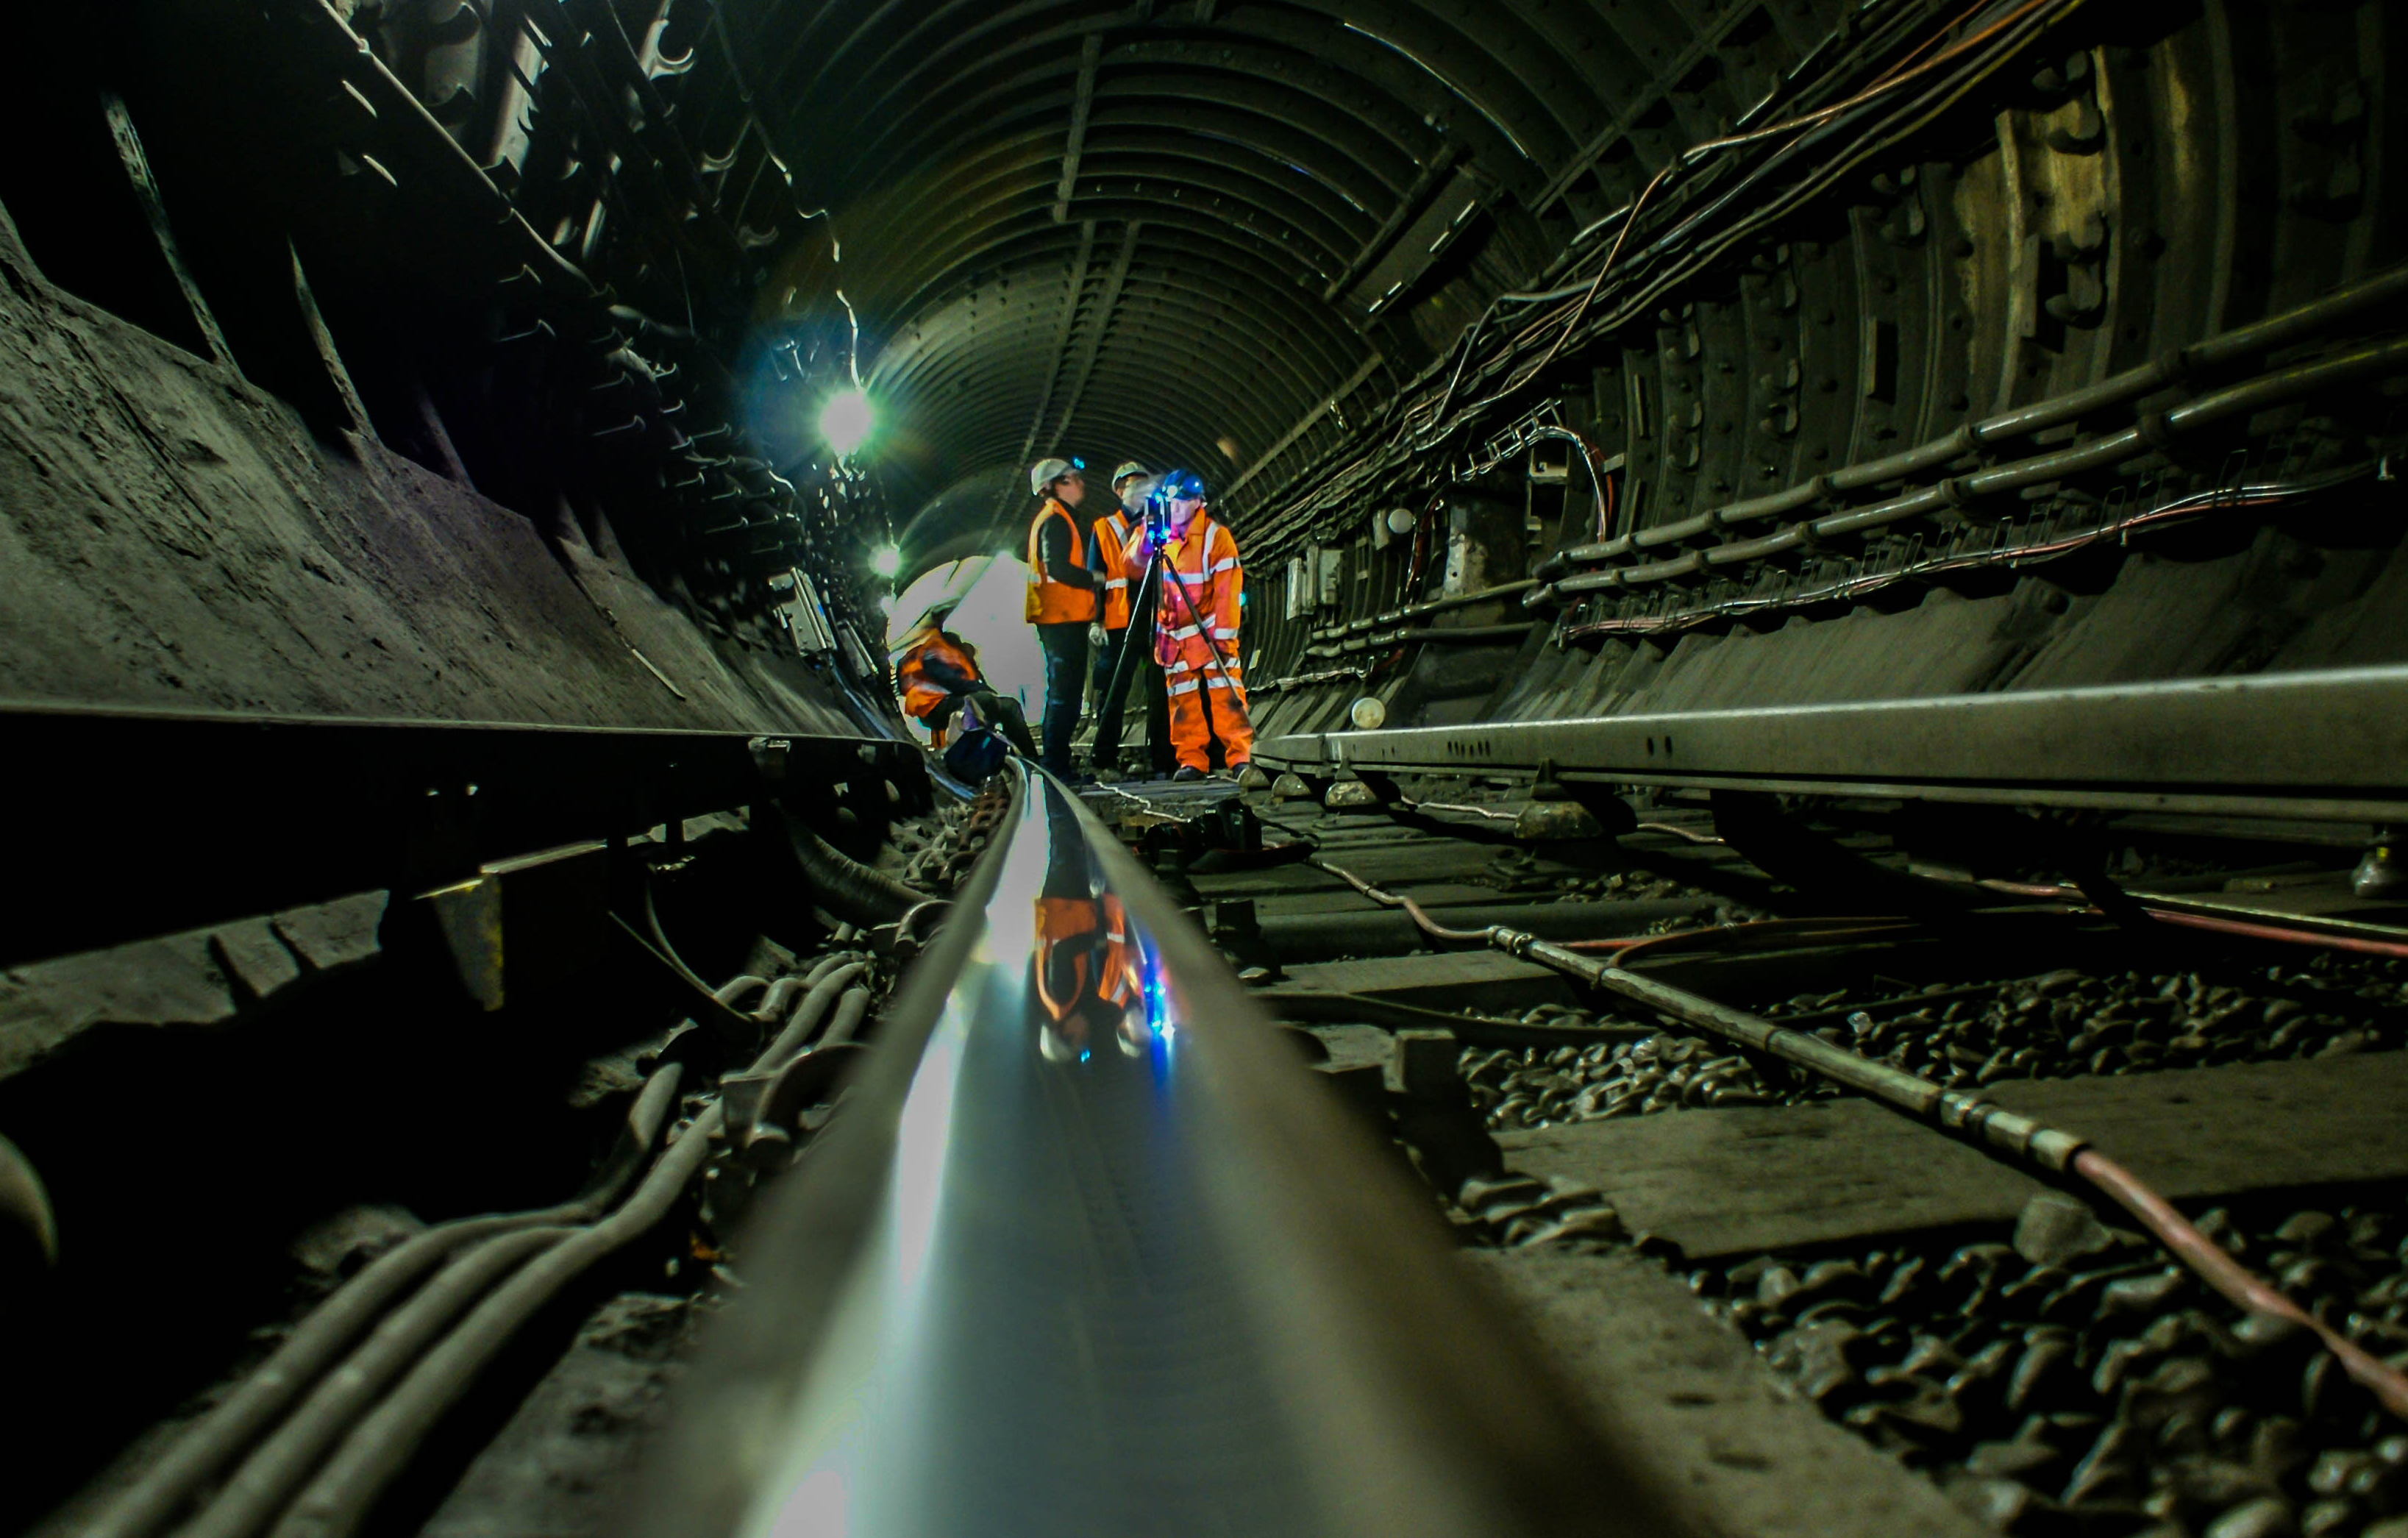 Prize-winning photo: CSIC team in Euston tunnel by Dr Phil Catton